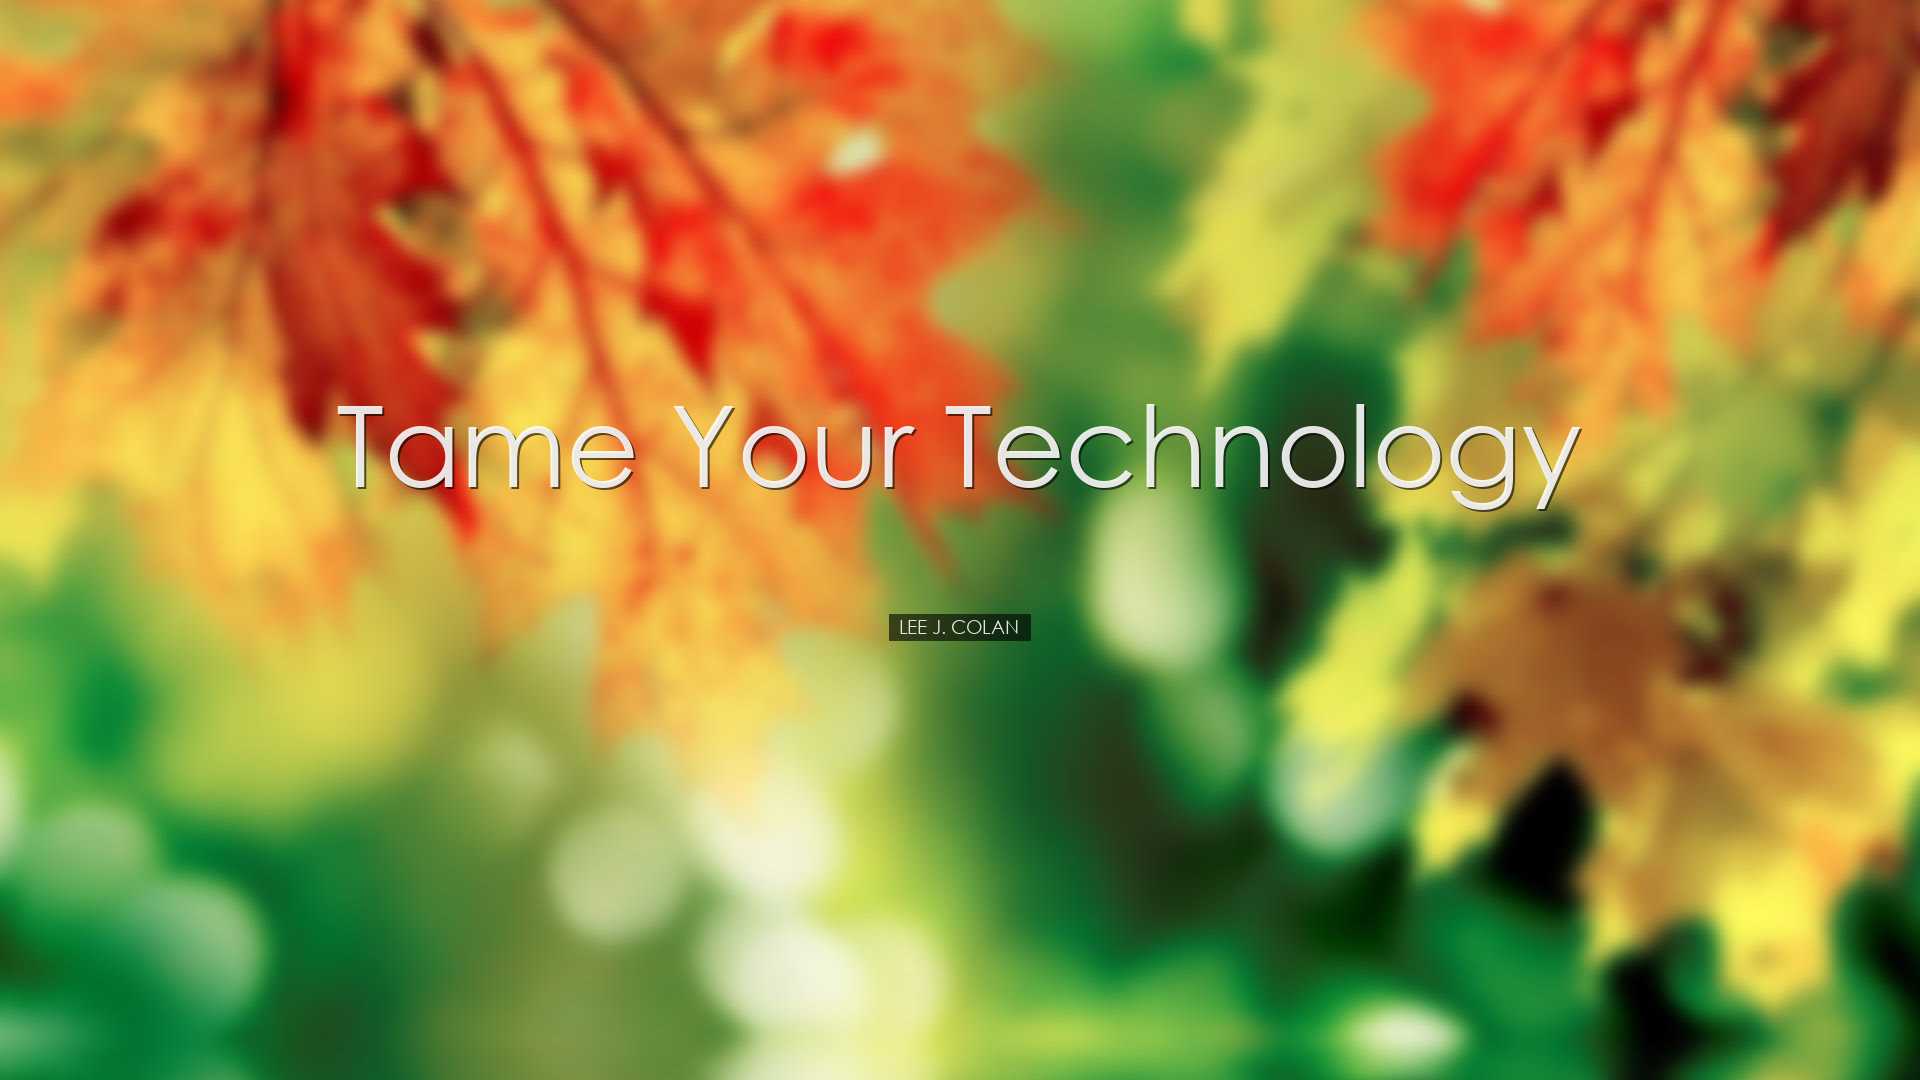 Tame your technology - Lee J. Colan